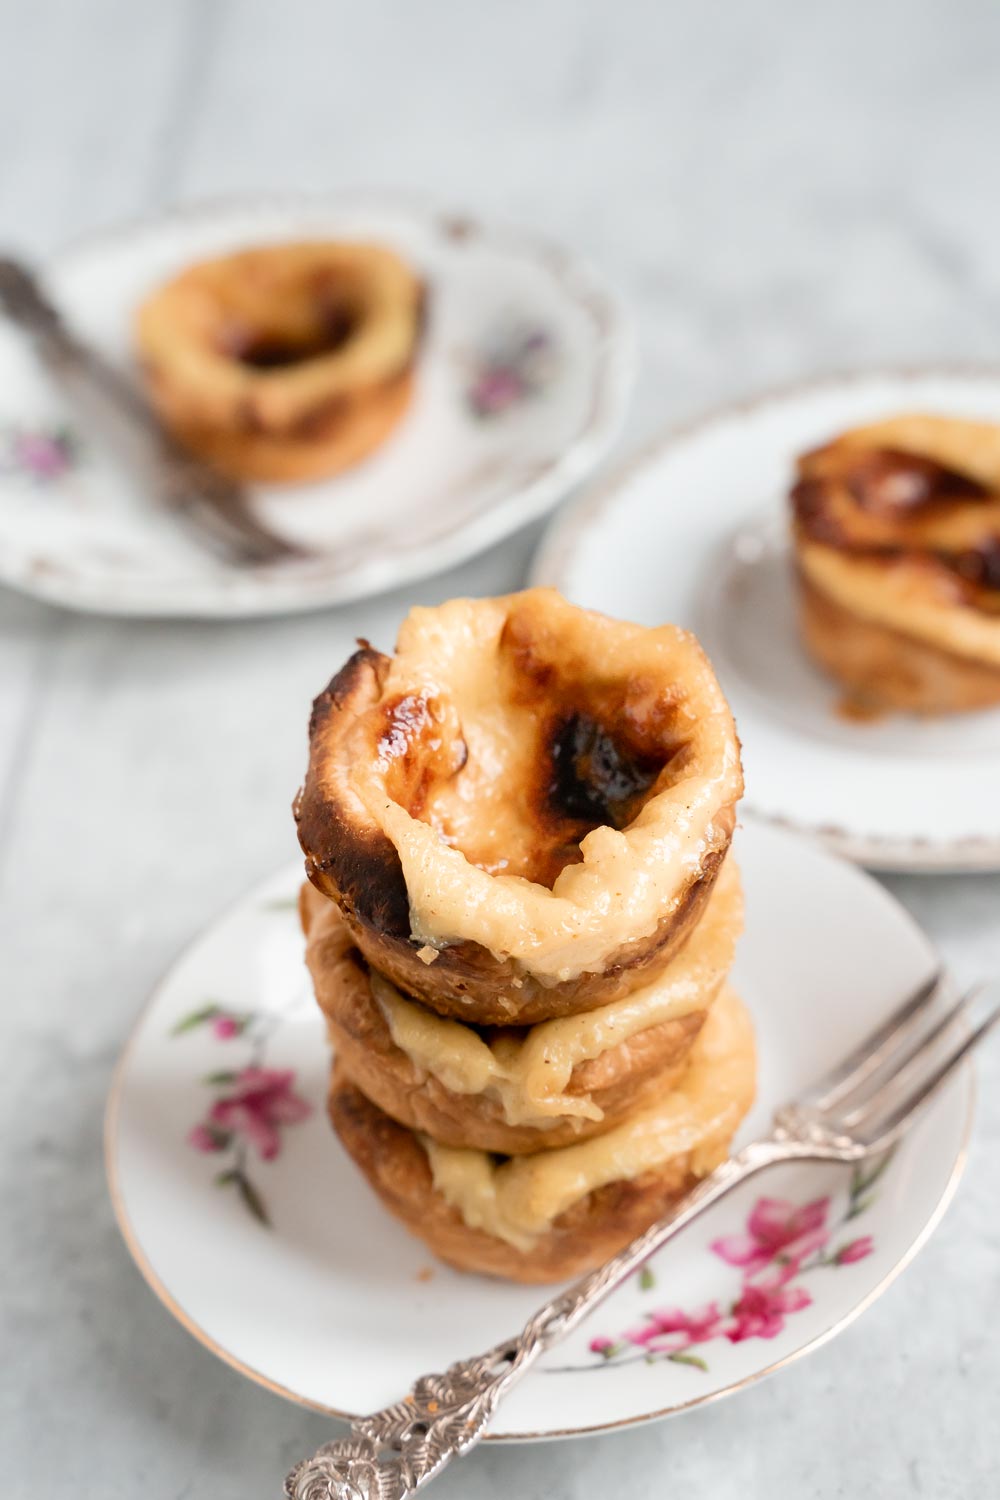 Threee vegan pasteis de natat stacked on top of each other.